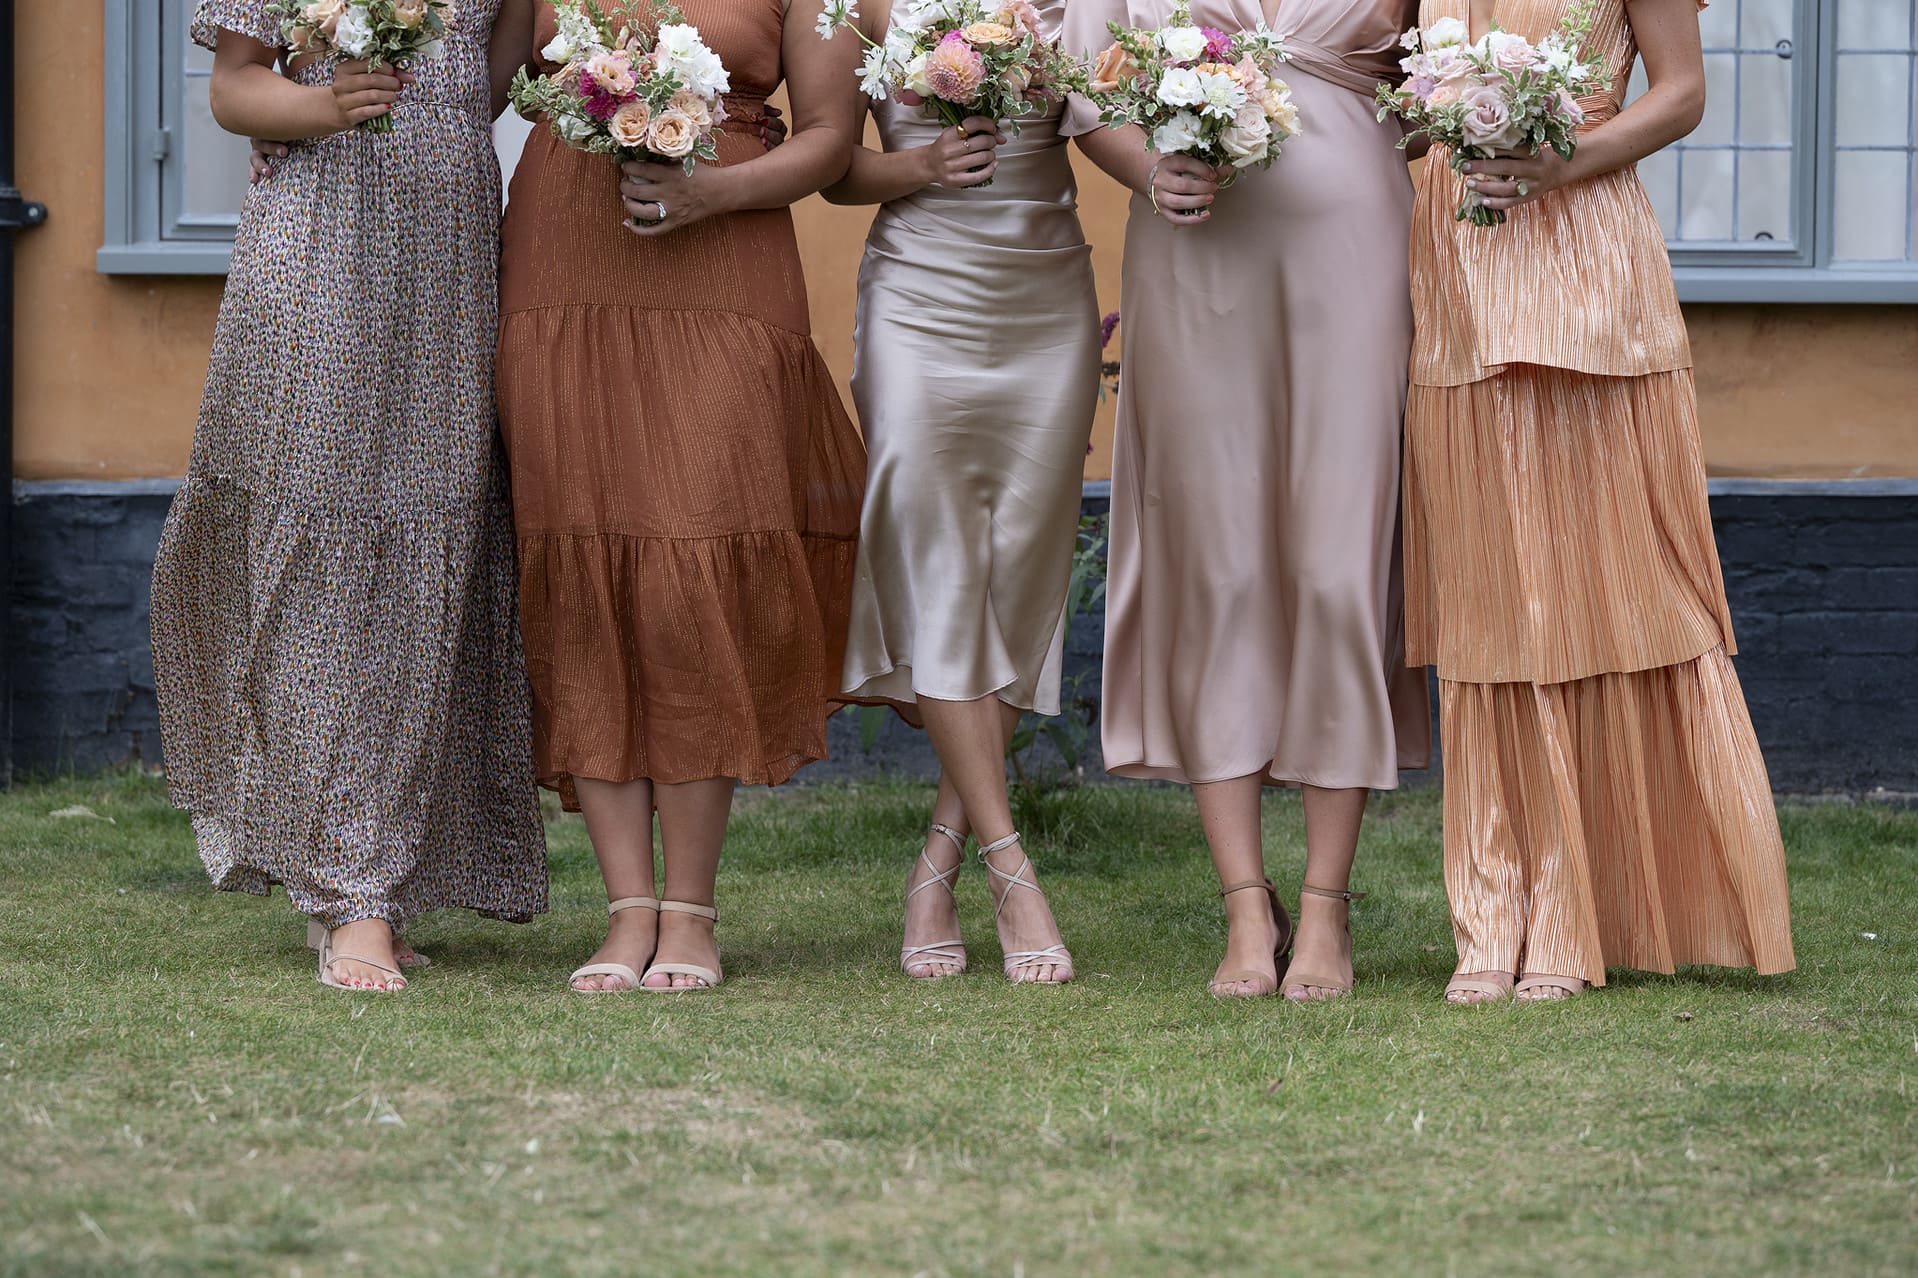 A close up detail photo of bridesmaids wearing mismatched dresses of the same tonal colours of peach, gold, rust, and dusky pink.